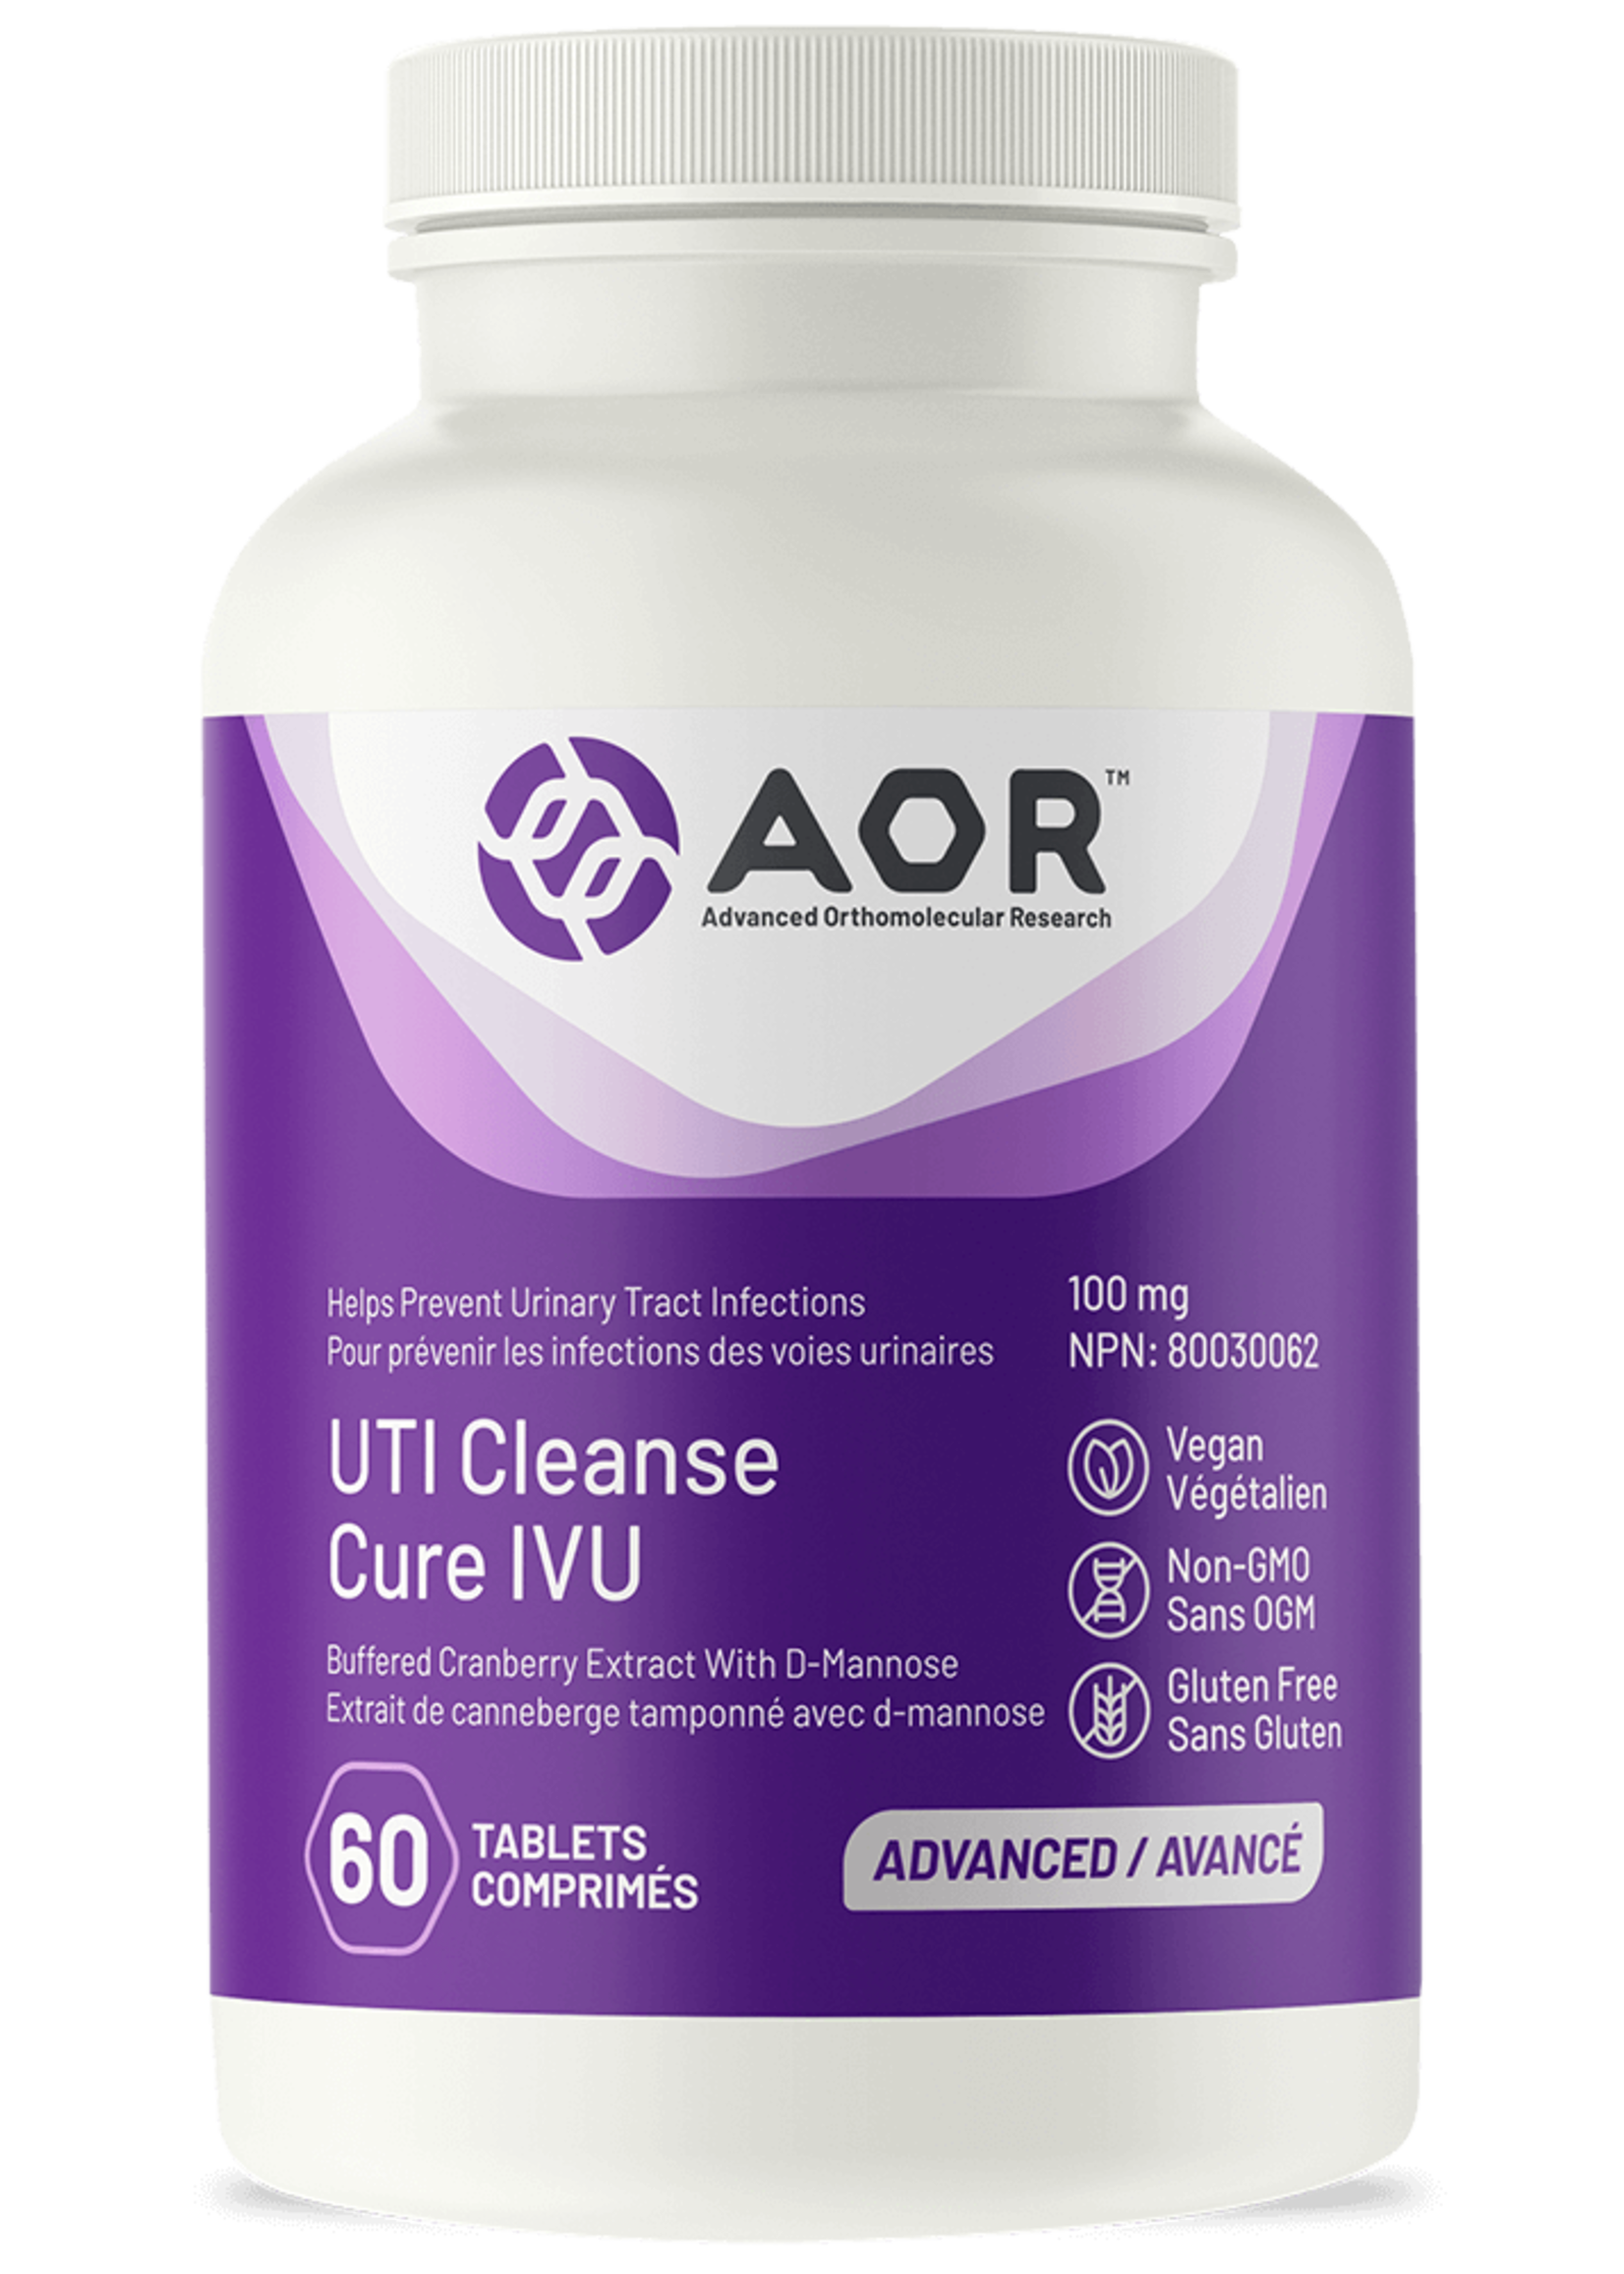 AOR UTI Cleanse w/D-Mannose - 60 tablets